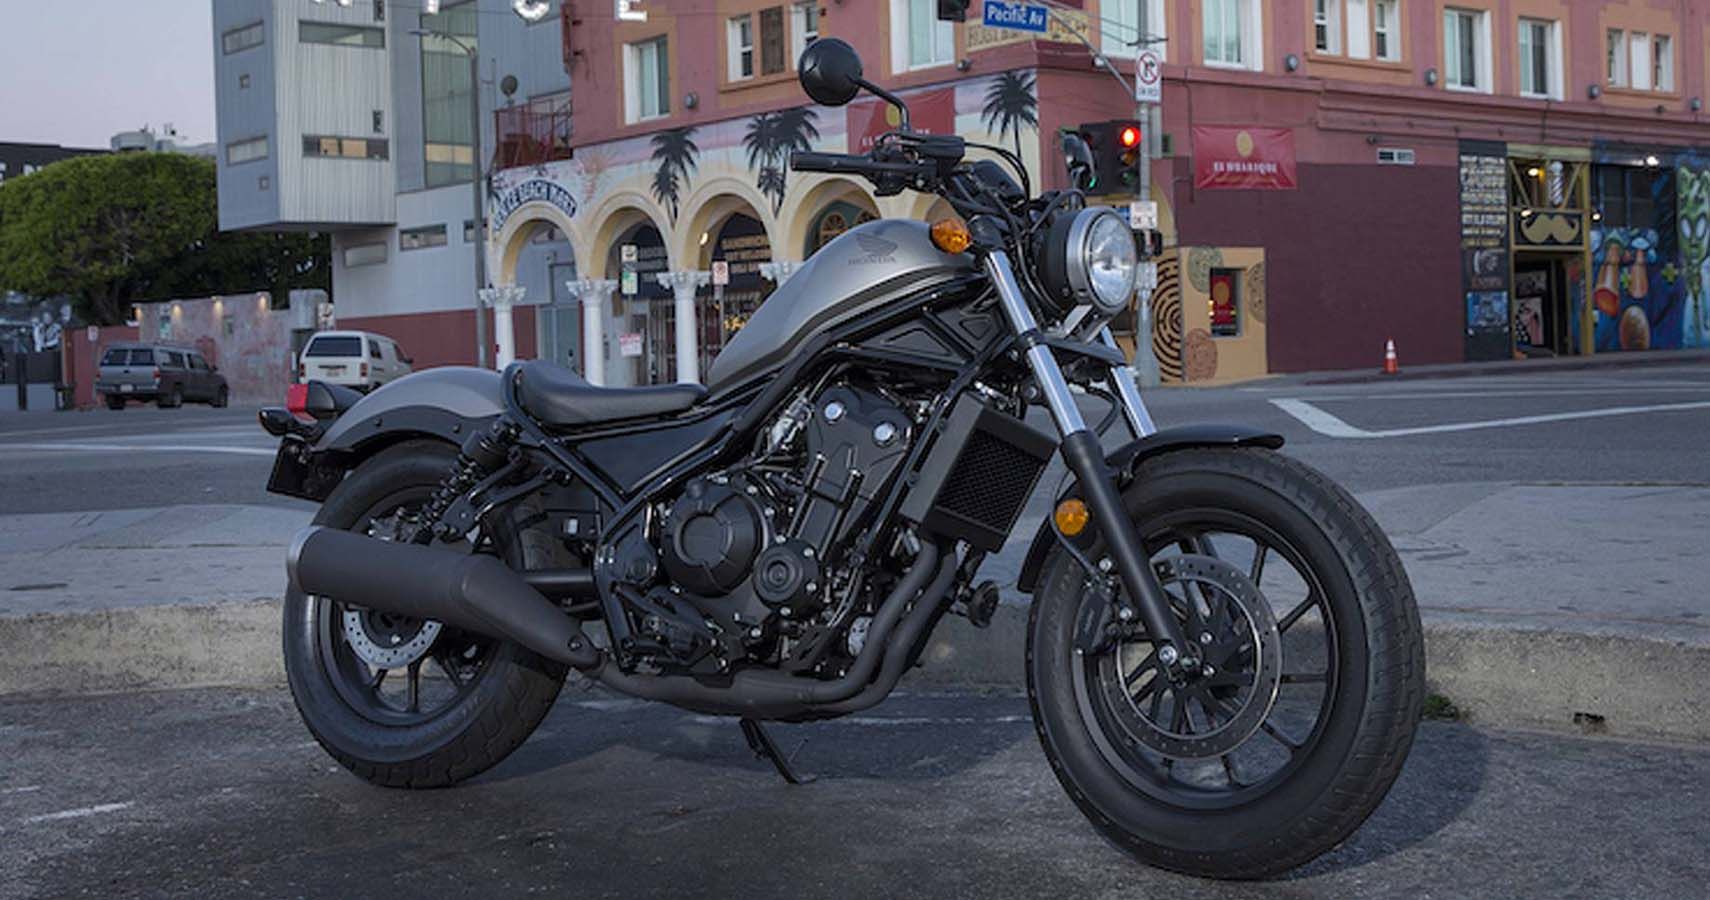 Here's What You Need To Know About The Honda Rebel 500